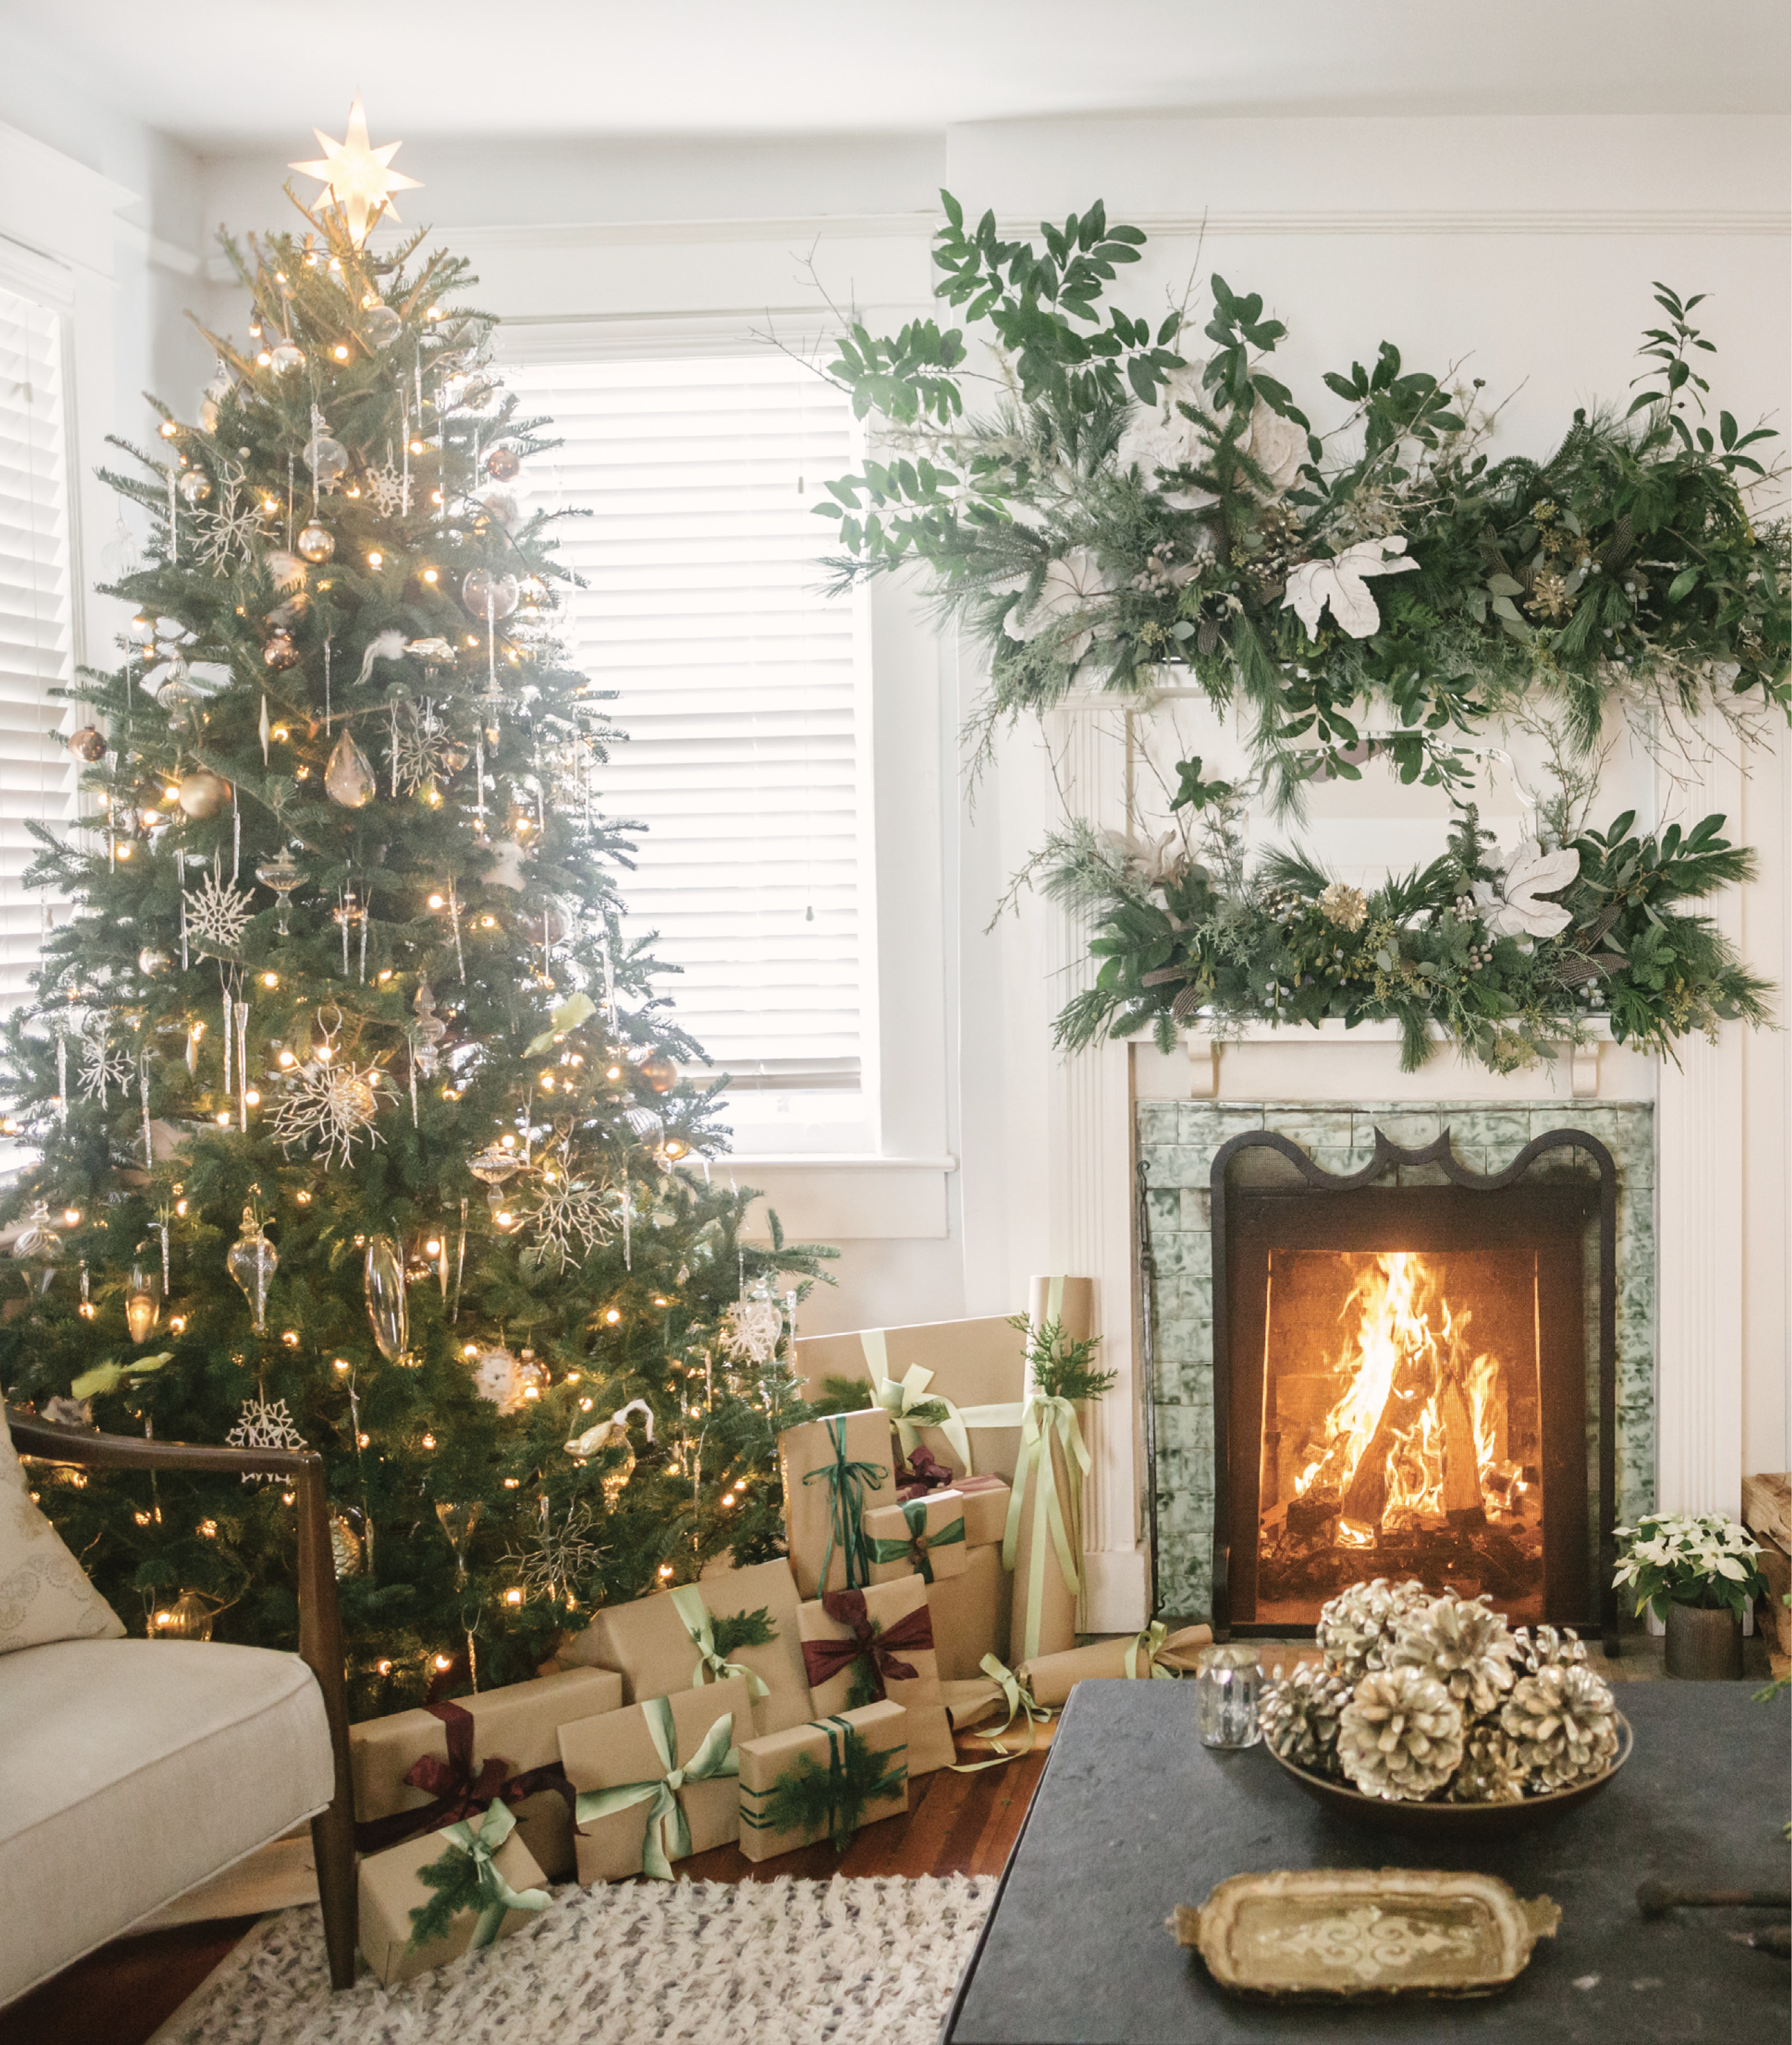 Classic holiday decor and woodsy flourishes in the living room of Heather’s circa-1920s bungalow